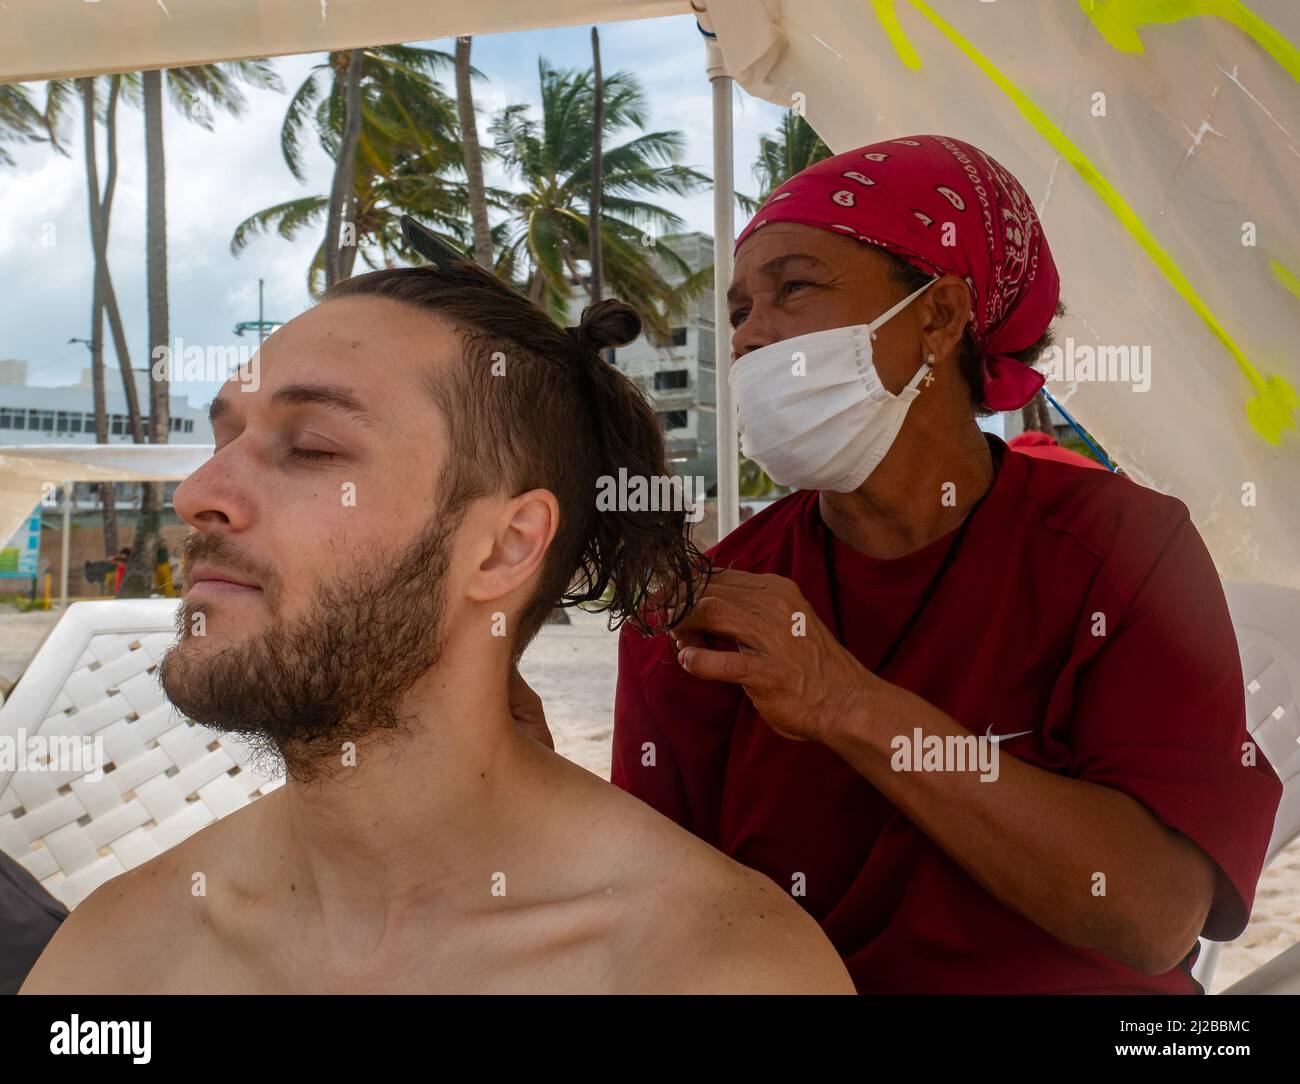 San Andres, Colombia - November 17 2021: Brown Woman with Mask Braiding a White Man's Hair Stock Photo